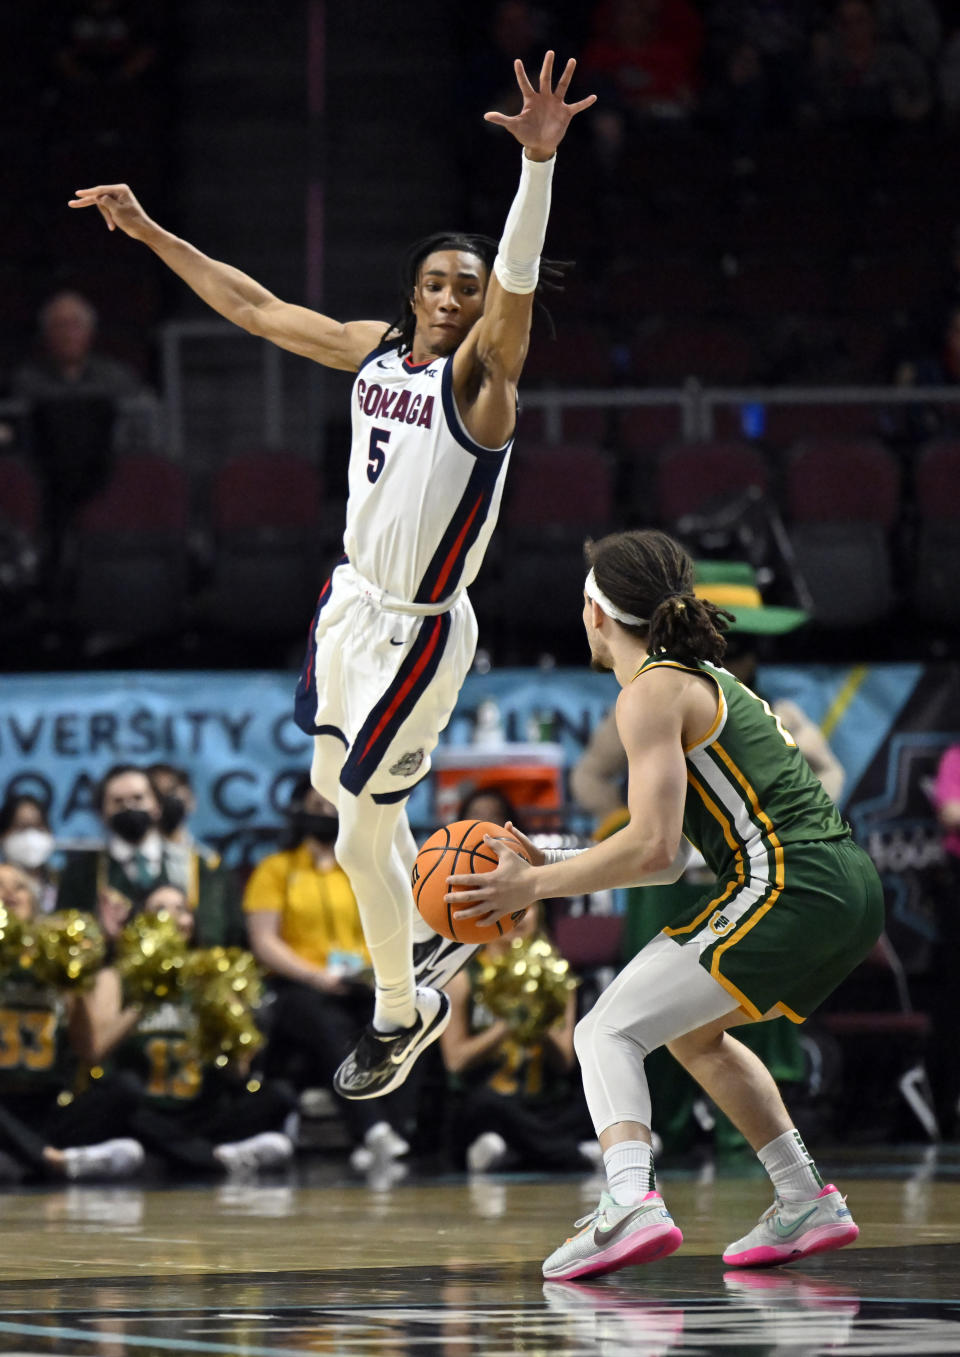 Gonzaga guard Hunter Sallis (5) defends against San Francisco guard Tyrell Roberts during the second half of an NCAA college basketball game in the semifinals of the West Coast Conference men's tournament Monday, March 6, 2023, in Las Vegas. (AP Photo/David Becker)